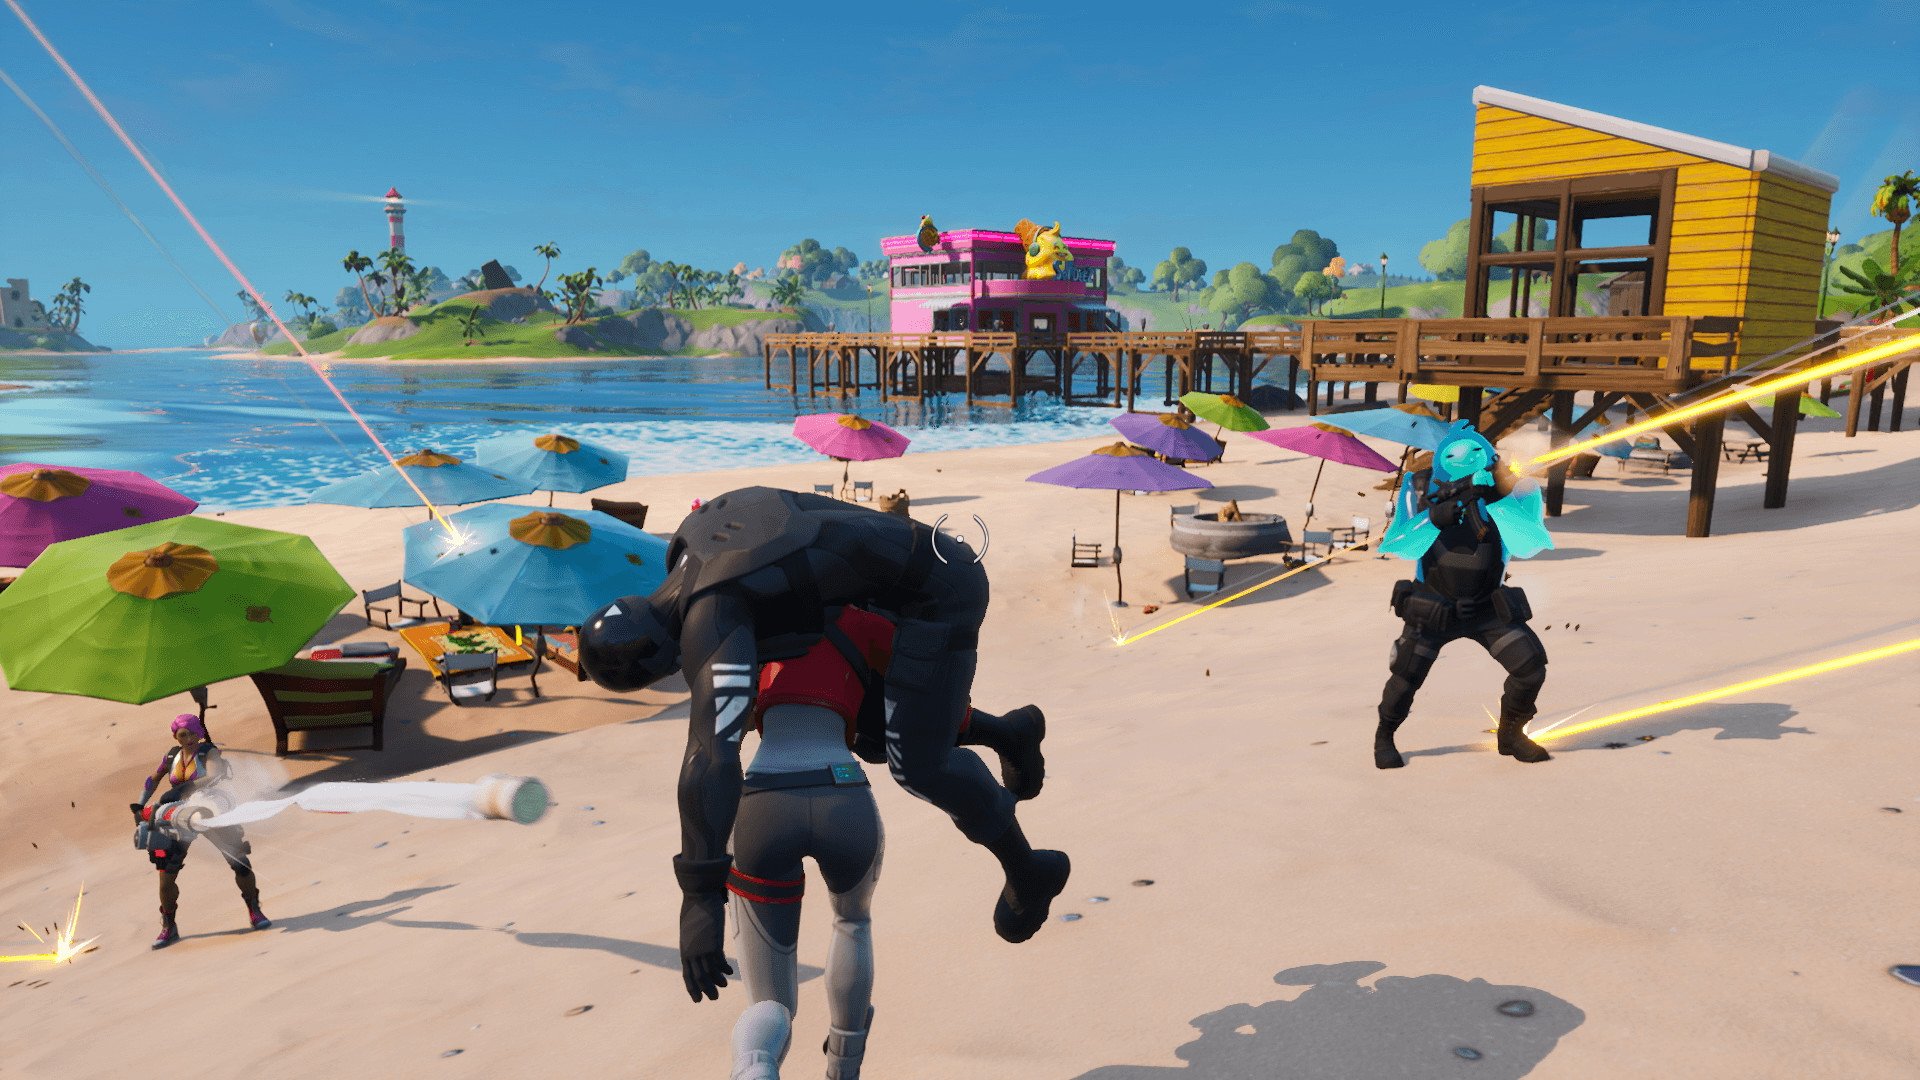 Fortnite Chapter 2 update released as story trailer shows new map | VGC